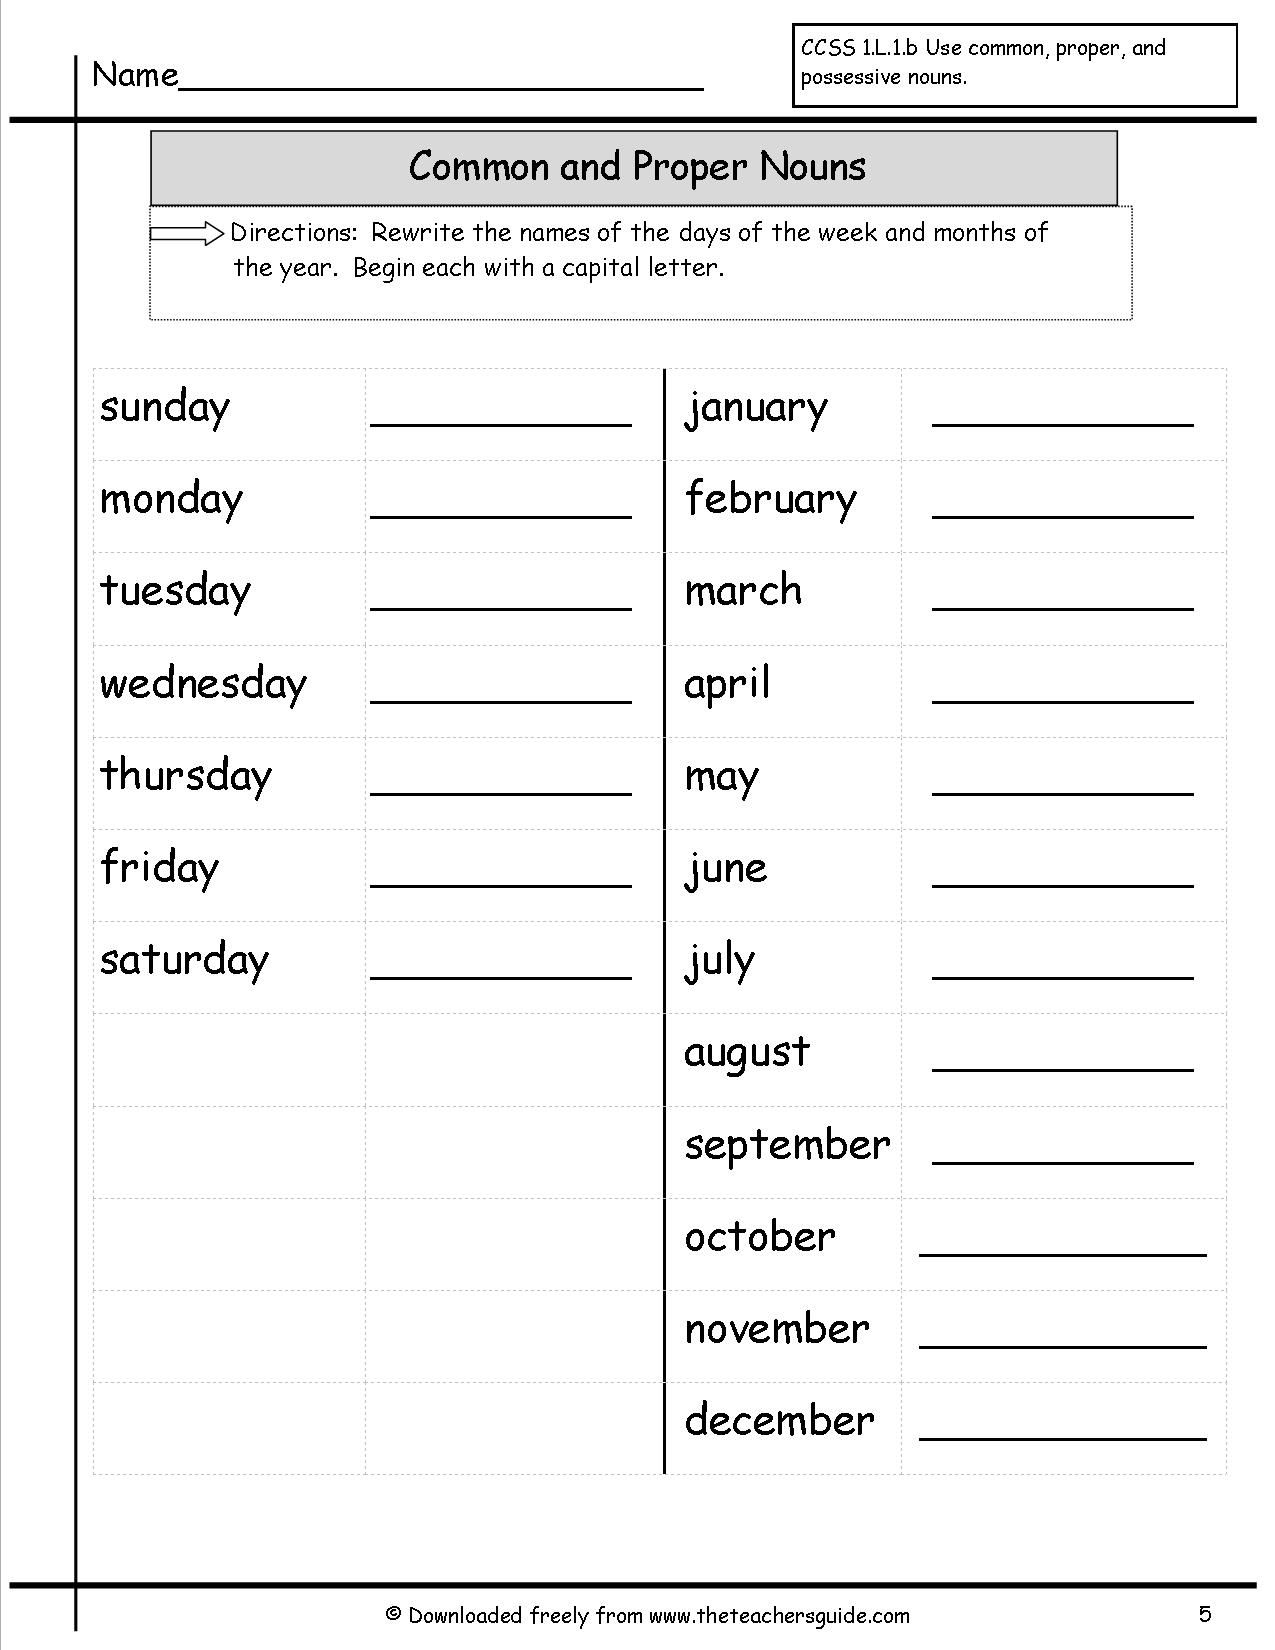 Printable Common And Proper Nouns Free Worksheets